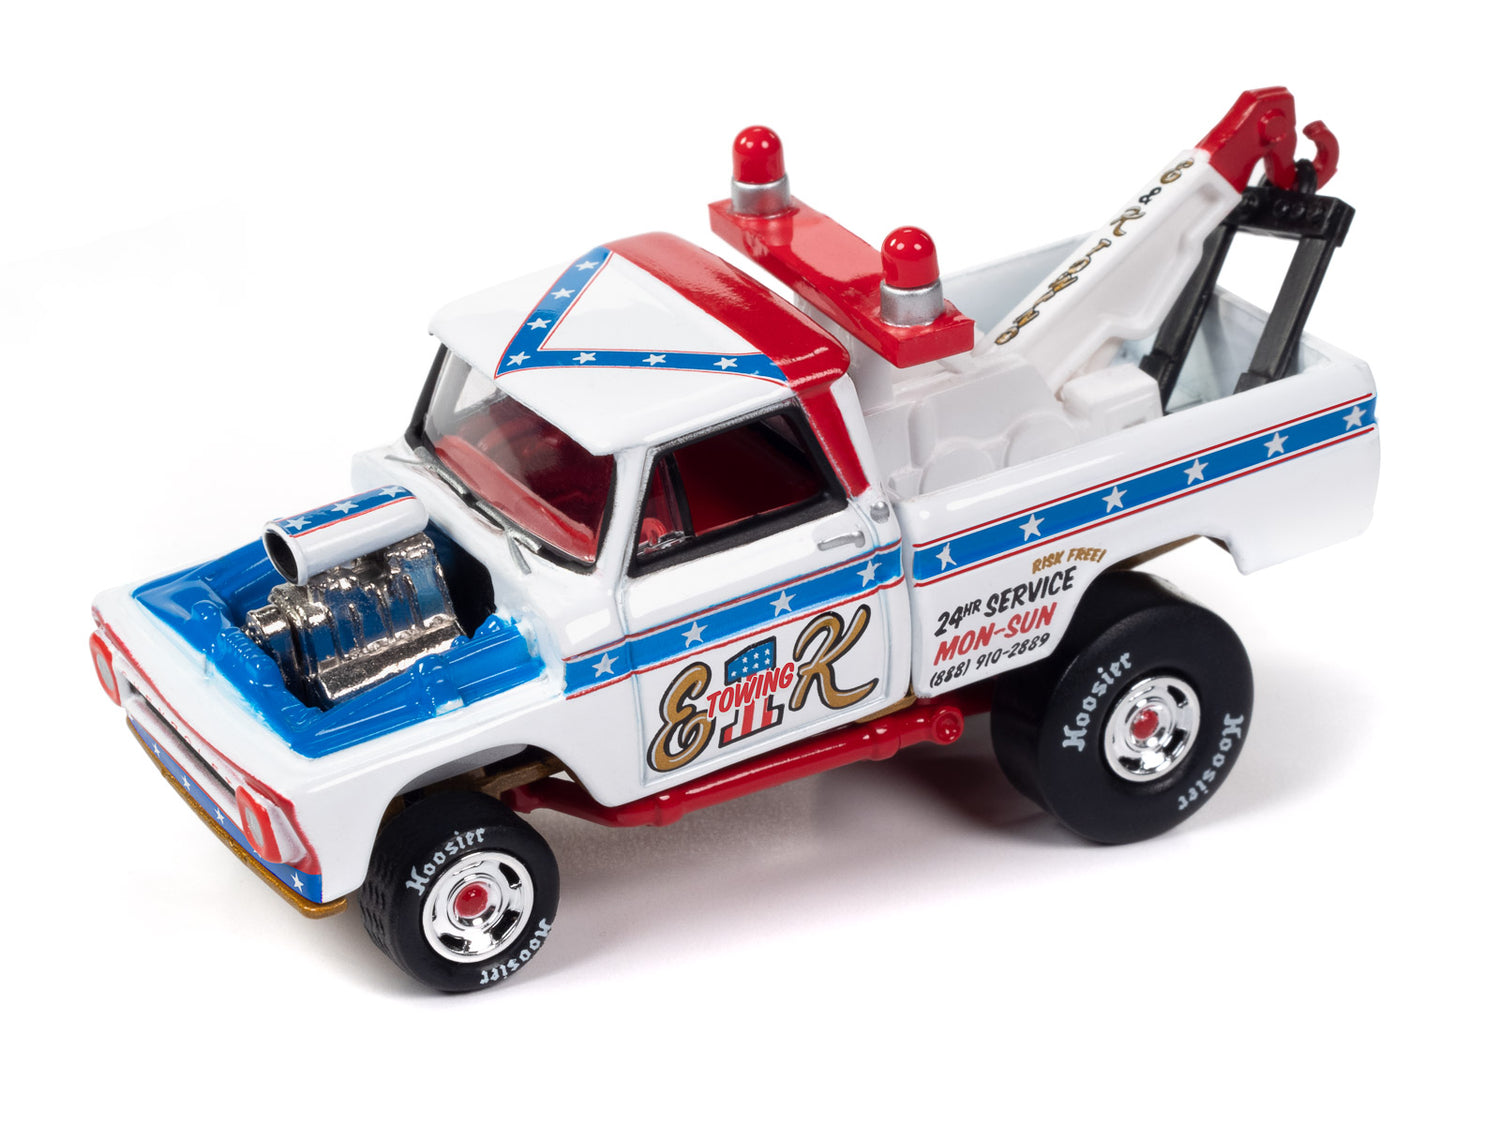 Johnny Lightning Street Freaks 1965 Chevy Tow Truck Zinger 1:64 Scale Diecast